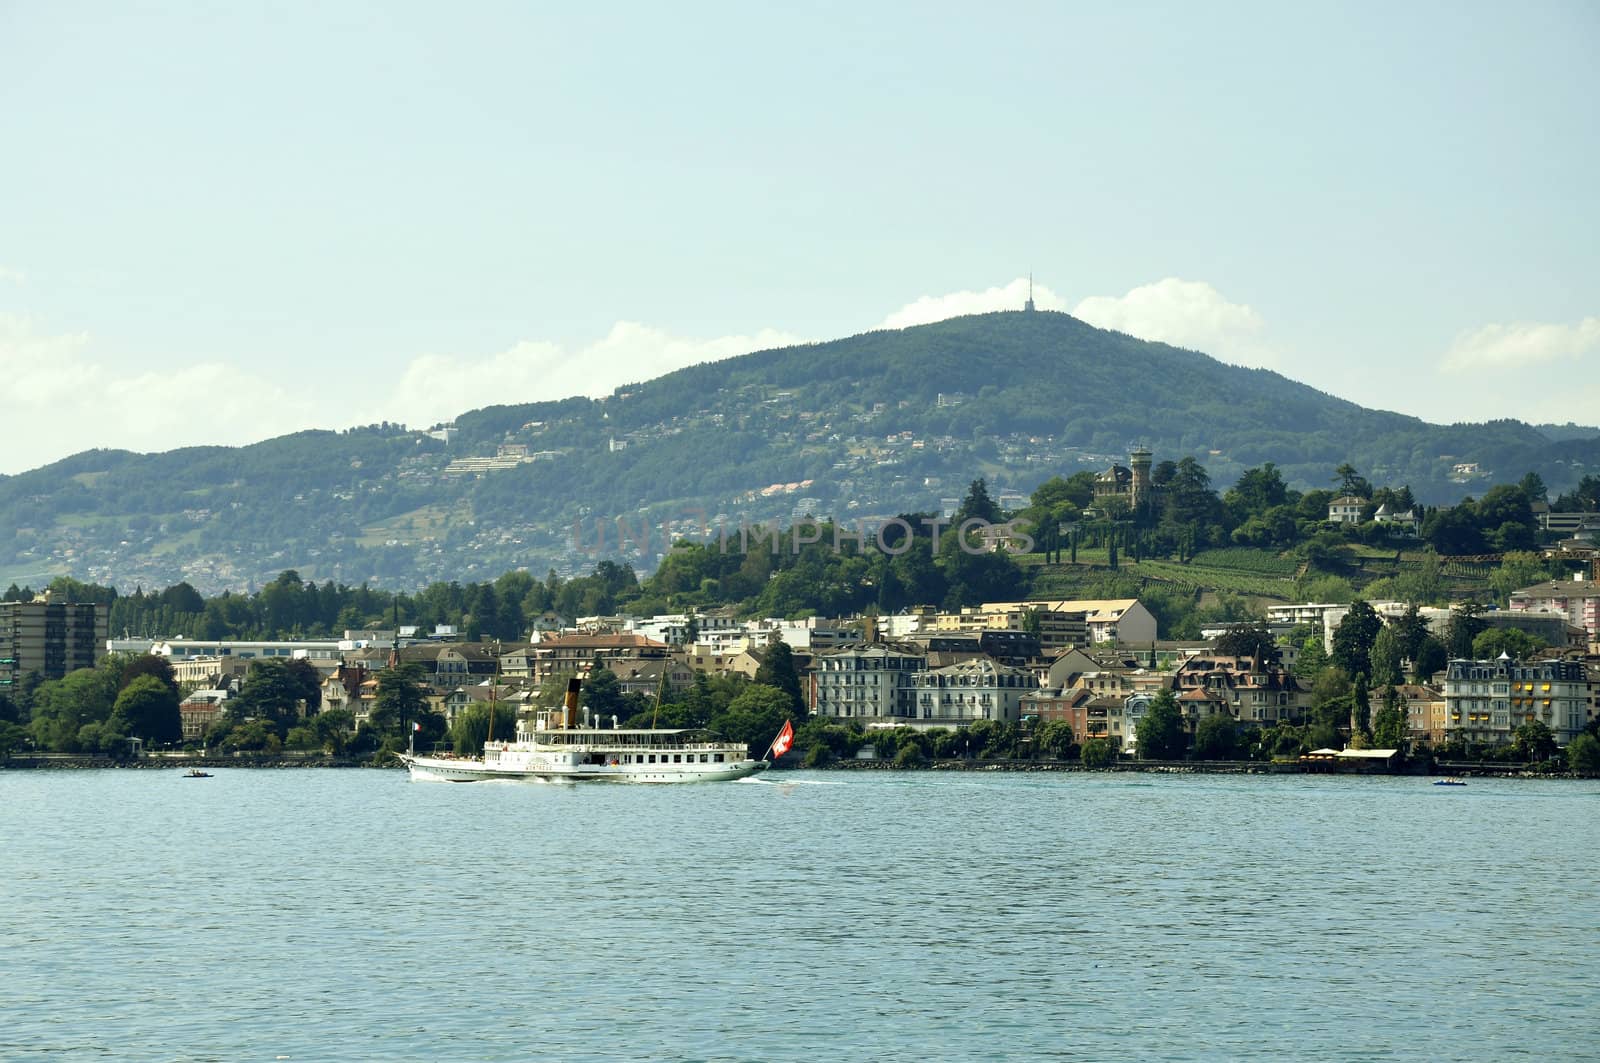 A beautiful view of Montreux in Switzerland